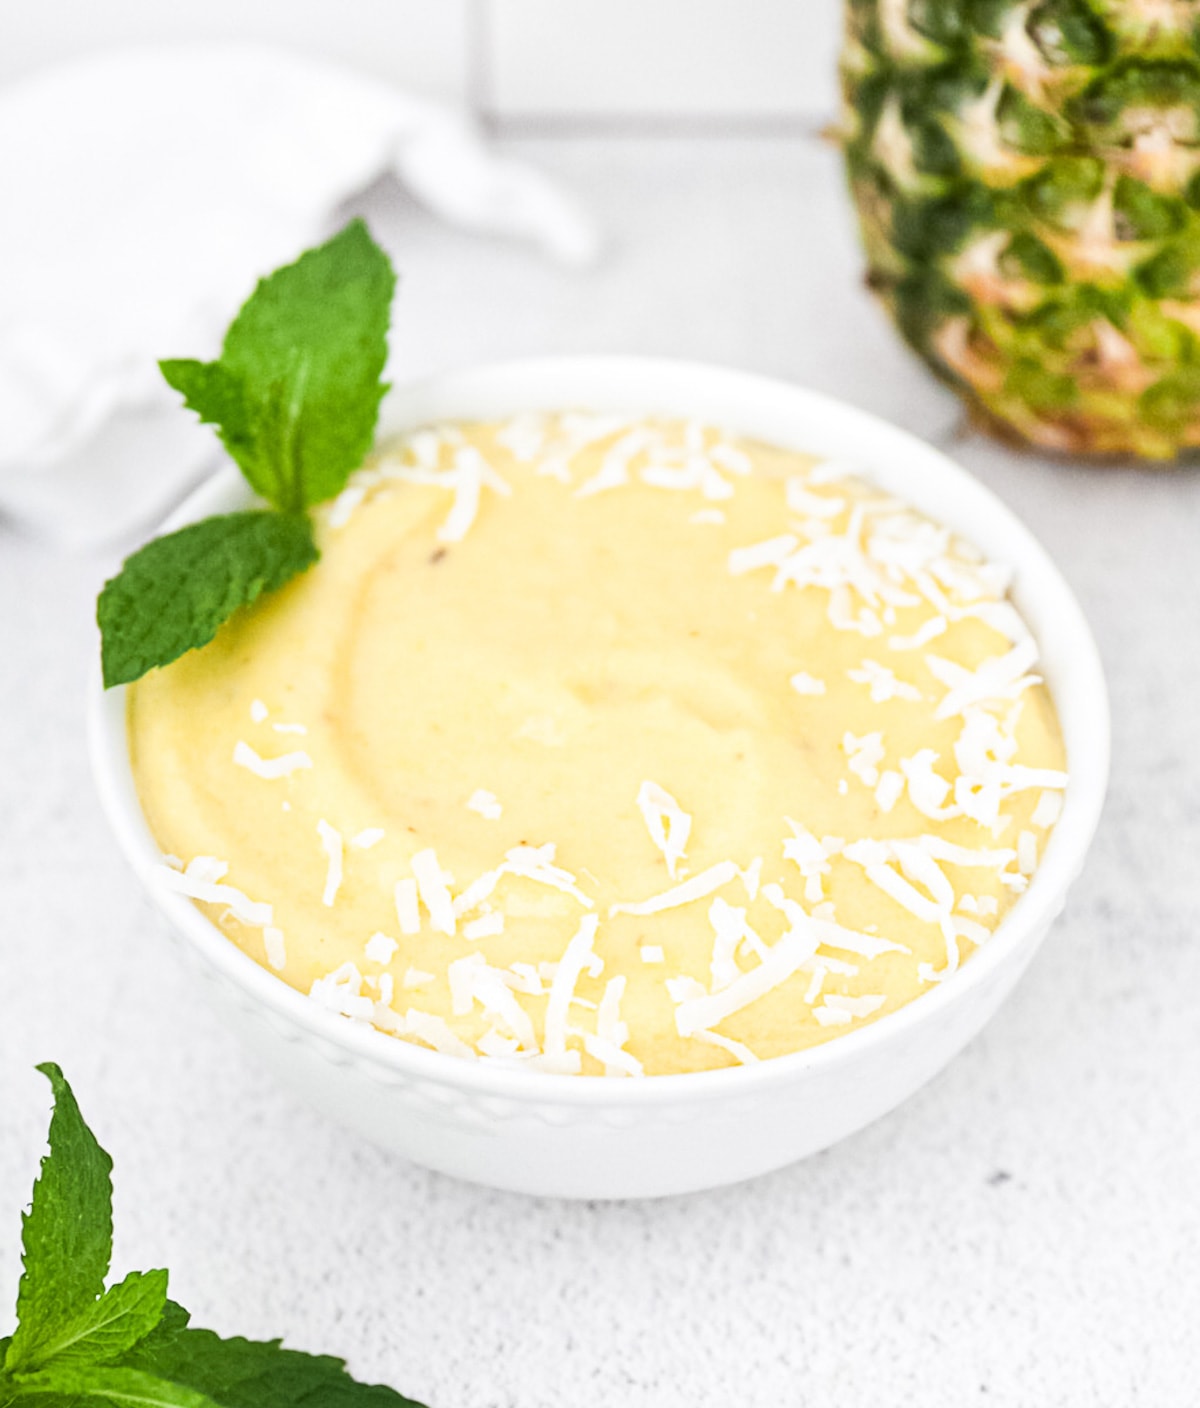 A 45 degree angle picture of a bright yellow smoothie. It is garnished with coconut flakes and mint. There is a white cloth, pineapple, and more mint in the background.